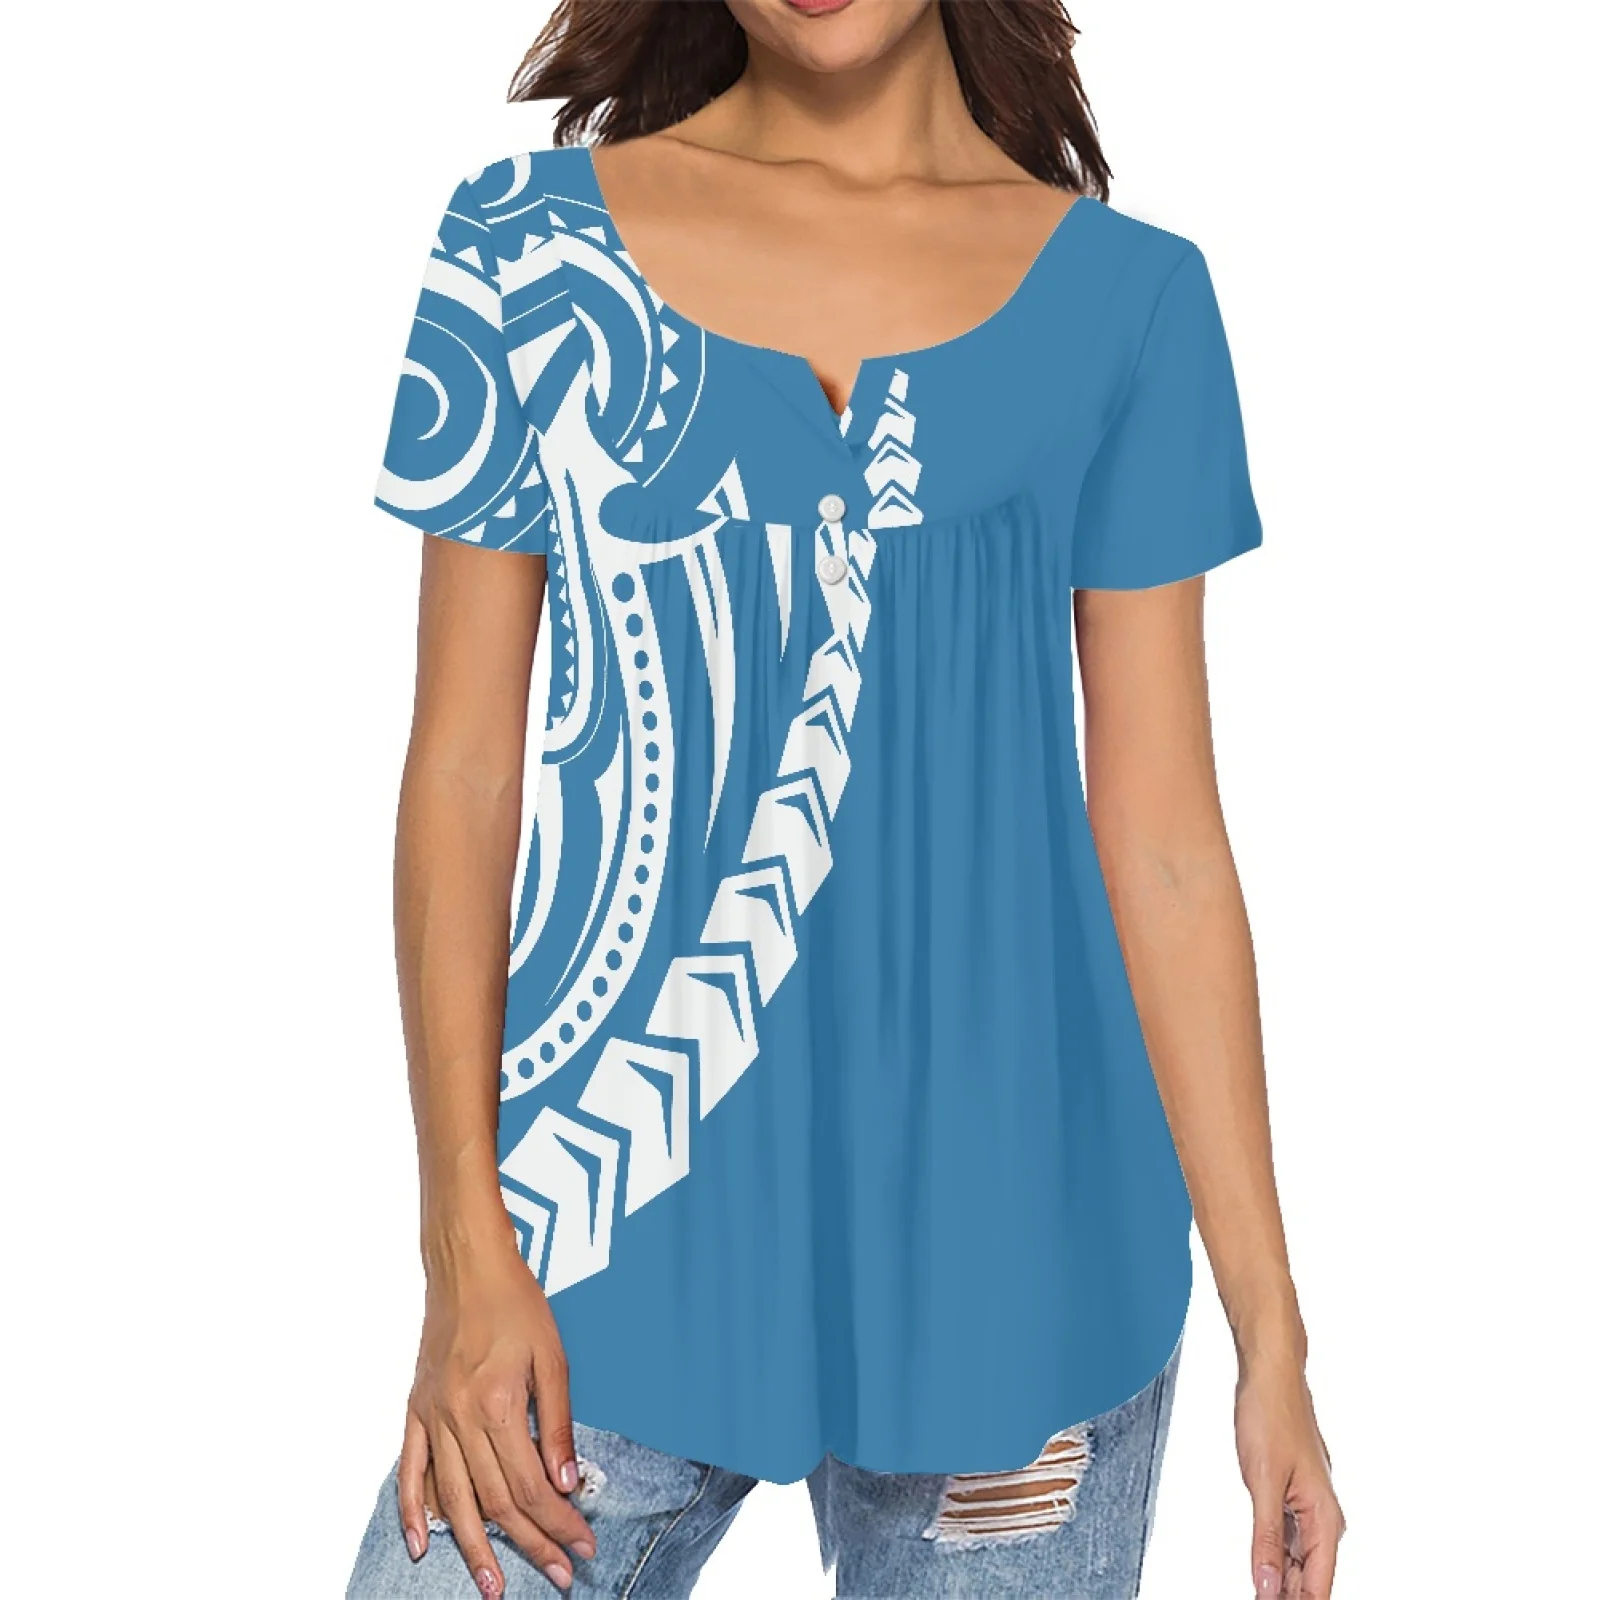 

Women Pleated Buckle Shirt Summer Crop Top Luxury Design Polynesian Tribal Style Sexy Charming Girl V-neck Tops Top Short-Sleeve